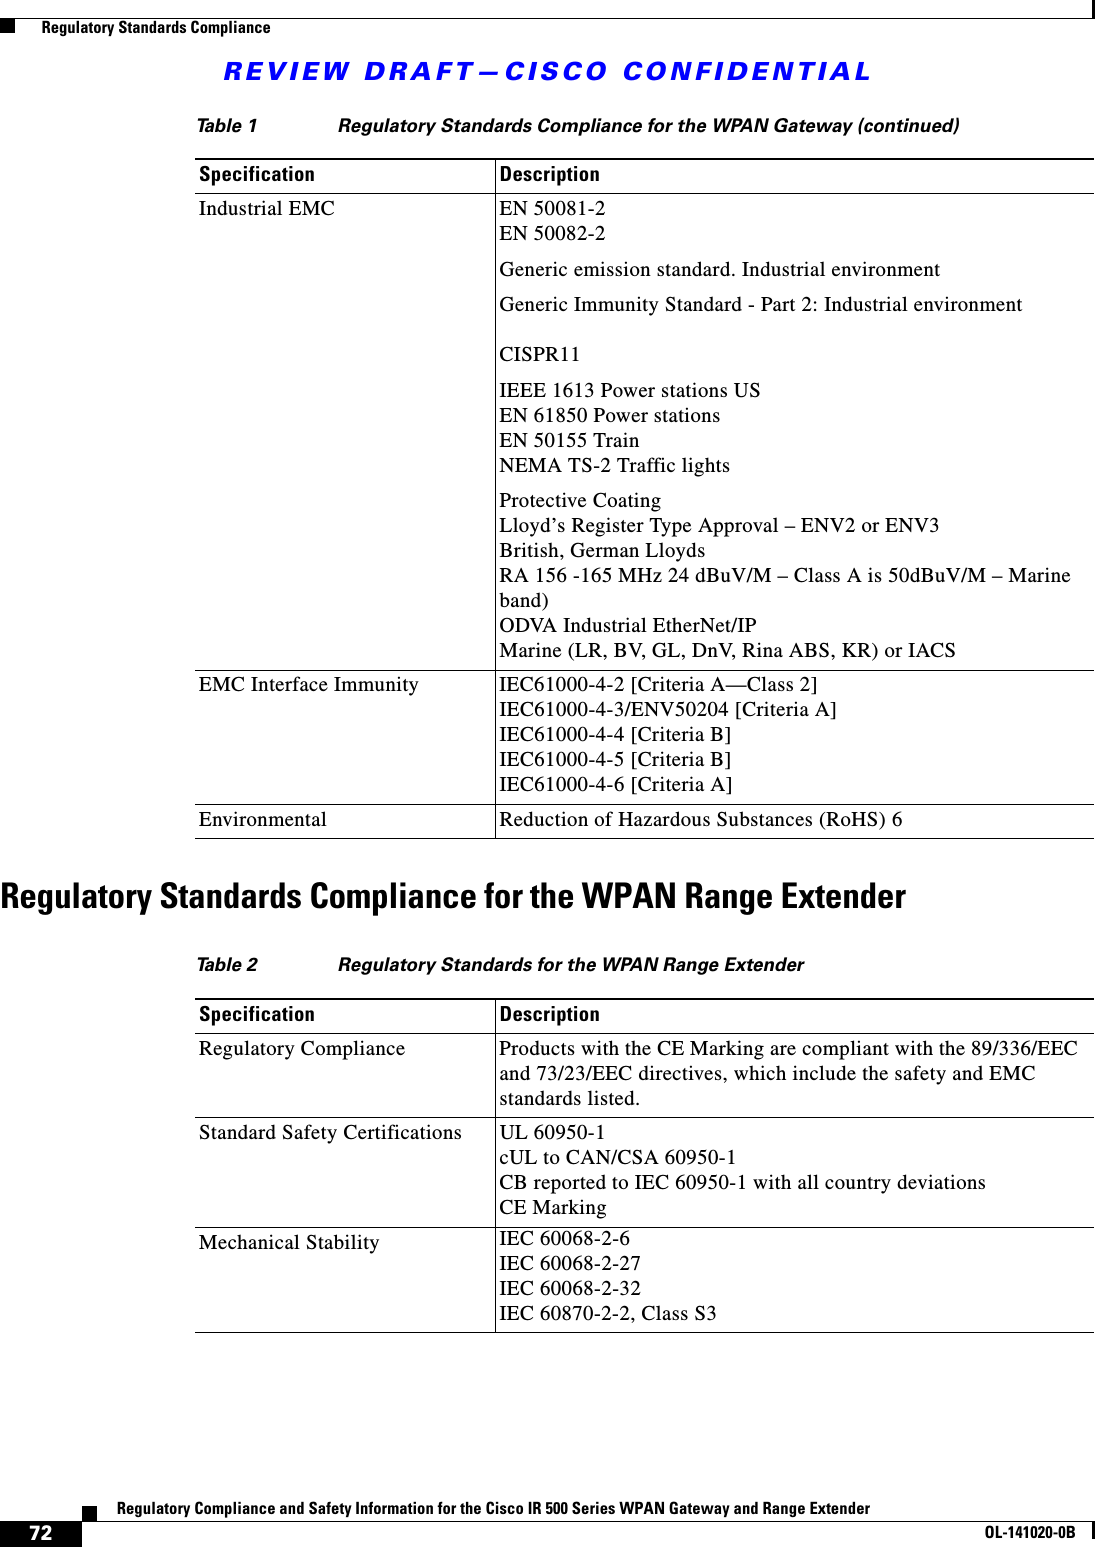 REVIEW DRAFT—CISCO CONFIDENTIAL72Regulatory Compliance and Safety Information for the Cisco IR 500 Series WPAN Gateway and Range ExtenderOL-141020-0B  Regulatory Standards ComplianceRegulatory Standards Compliance for the WPAN Range ExtenderIndustrial EMC EN 50081-2EN 50082-2Generic emission standard. Industrial environmentGeneric Immunity Standard - Part 2: Industrial environmentCISPR11IEEE 1613 Power stations USEN 61850 Power stationsEN 50155 TrainNEMA TS-2 Traffic lightsProtective CoatingLloyd’s Register Type Approval – ENV2 or ENV3British, German LloydsRA 156 -165 MHz 24 dBuV/M – Class A is 50dBuV/M – Marine band)ODVA Industrial EtherNet/IP Marine (LR, BV, GL, DnV, Rina ABS, KR) or IACS EMC Interface Immunity IEC61000-4-2 [Criteria A—Class 2]IEC61000-4-3/ENV50204 [Criteria A]IEC61000-4-4 [Criteria B]IEC61000-4-5 [Criteria B]IEC61000-4-6 [Criteria A]Environmental Reduction of Hazardous Substances (RoHS) 6Table 2 Regulatory Standards for the WPAN Range ExtenderSpecification DescriptionRegulatory Compliance Products with the CE Marking are compliant with the 89/336/EEC and 73/23/EEC directives, which include the safety and EMC standards listed.Standard Safety Certifications UL 60950-1cUL to CAN/CSA 60950-1CB reported to IEC 60950-1 with all country deviationsCE Marking Mechanical Stability  IEC 60068-2-6 IEC 60068-2-27 IEC 60068-2-32 IEC 60870-2-2, Class S3Table 1 Regulatory Standards Compliance for the WPAN Gateway (continued)Specification Description